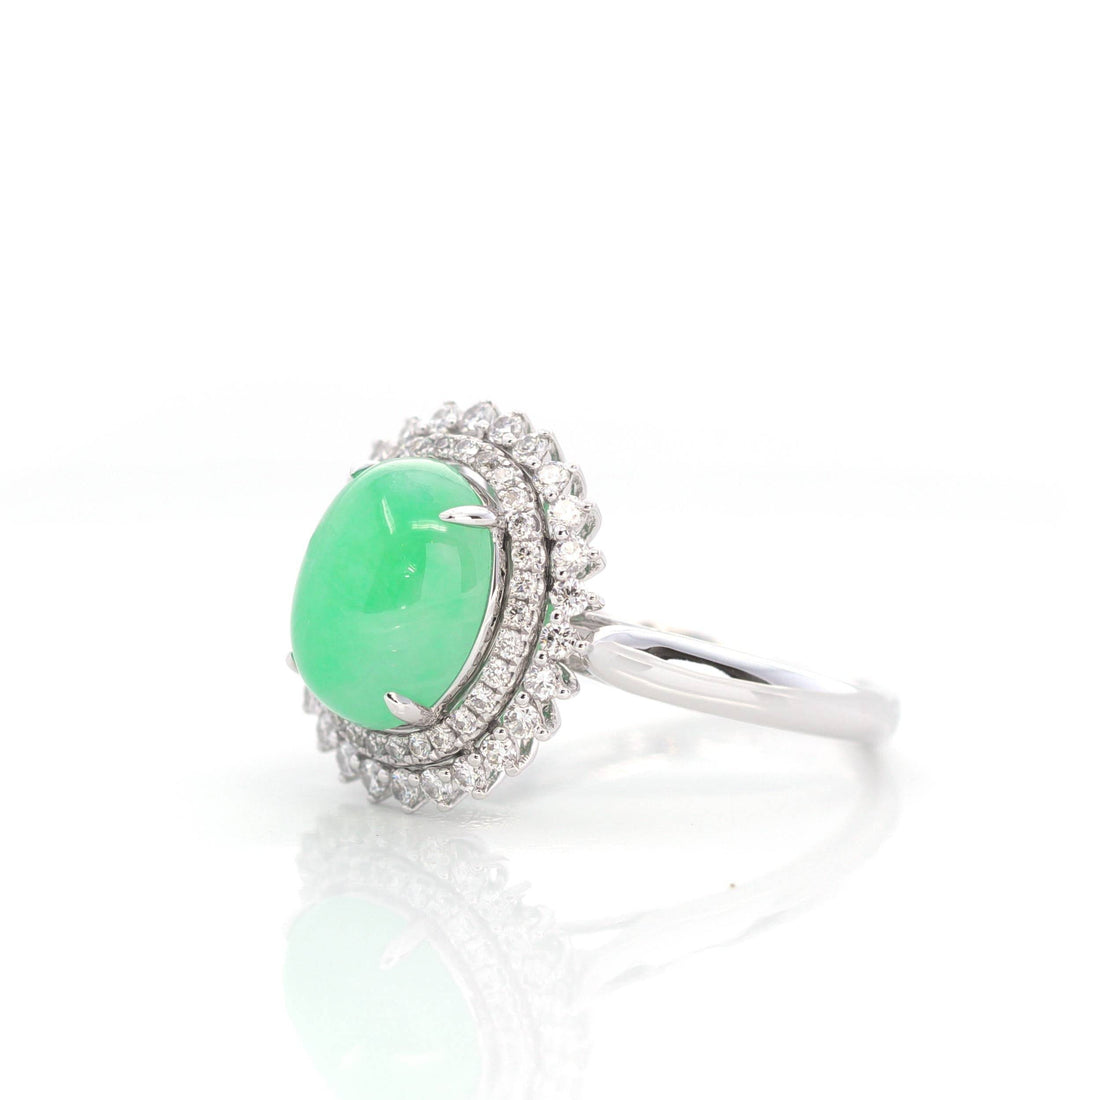 Baikalla Jewelry Jadeite Engagement Ring 18k White Gold Natural Imperial Green Jadeite Engagement Ring With Diamonds